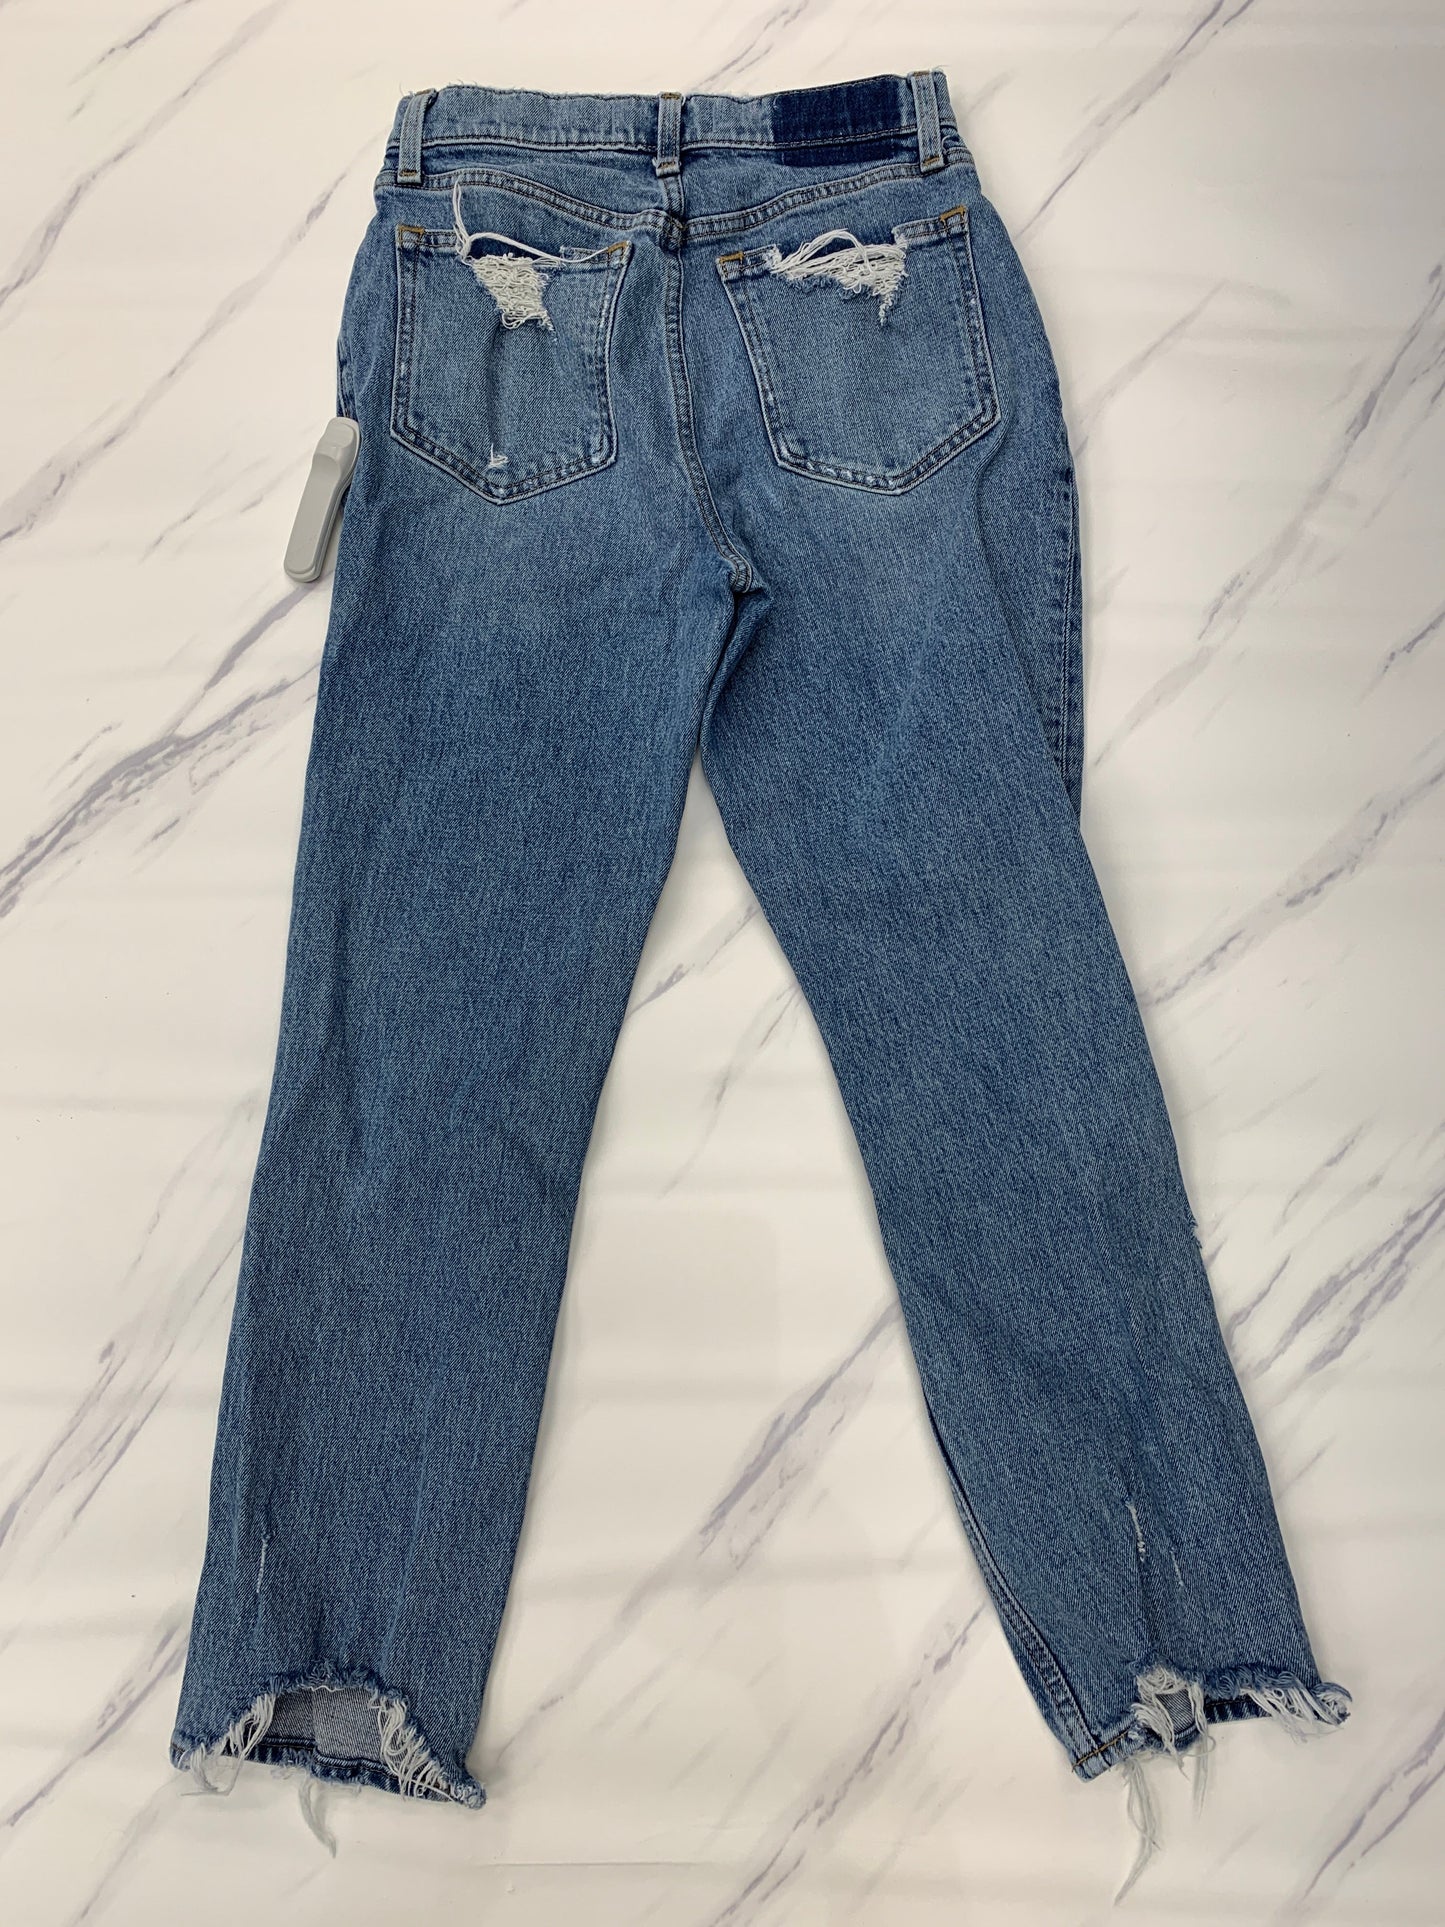 Jeans Straight Abercrombie And Fitch, Size 2